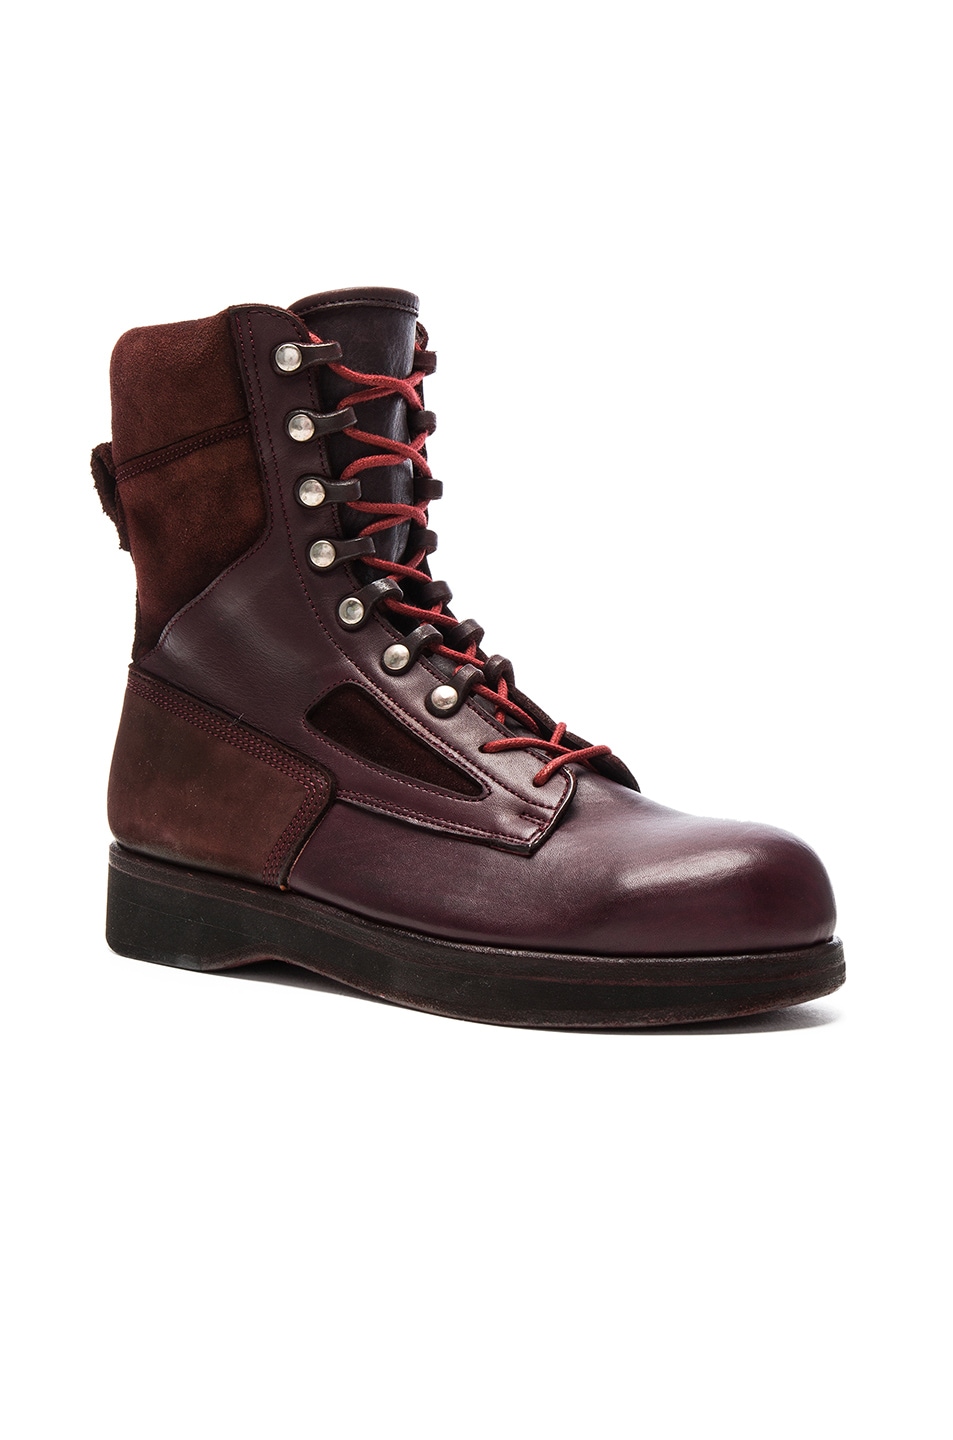 Image 1 of Sacai x Hender Scheme Leather Boots in Bordeaux